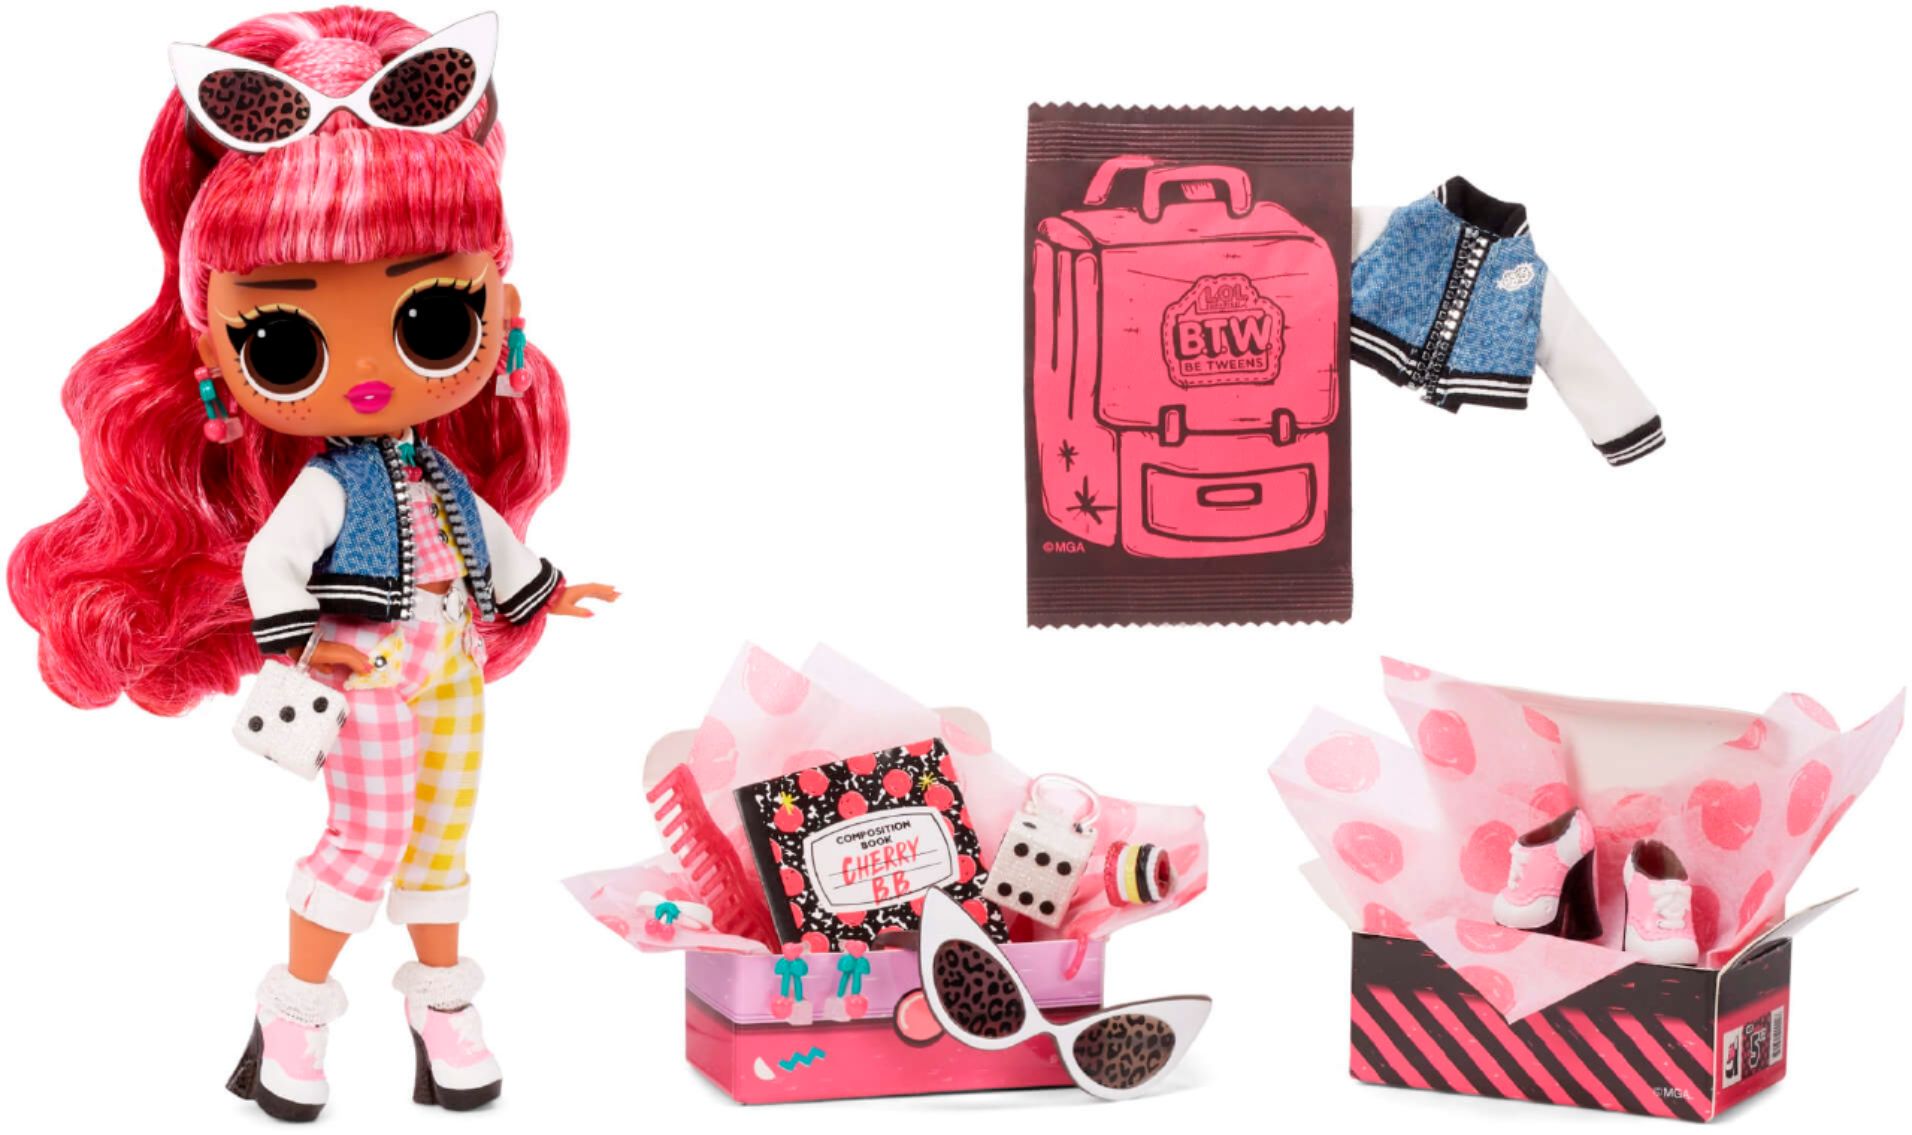 Angle View: LOL Surprise Tweens Fashion Doll Cherry BB With 15 Surprises, Great Gift for Kids Ages 4 5 6+